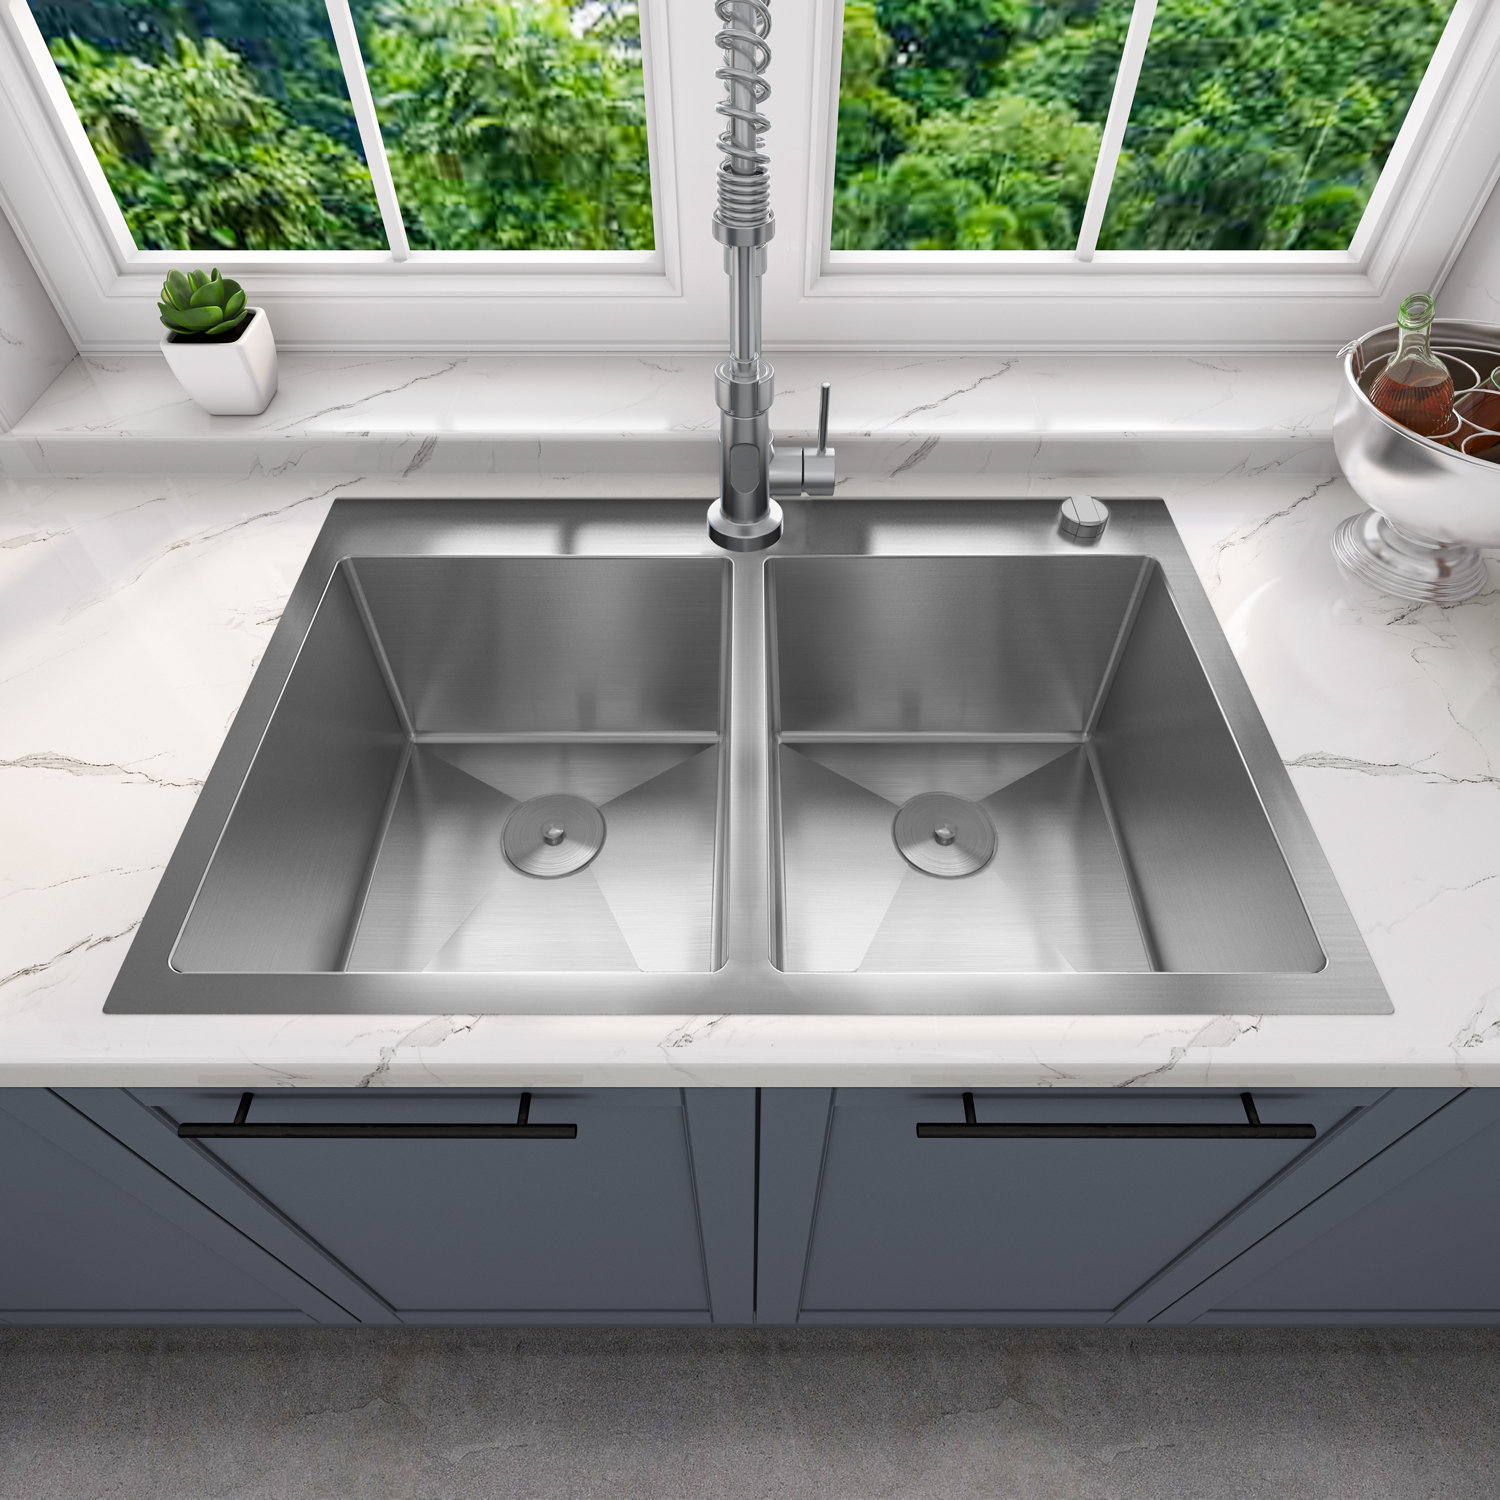 Large 36 Inch Drop-in 304 Stainless Steel PVD Nano Handmade Double bowl topmount Kitchen Sink